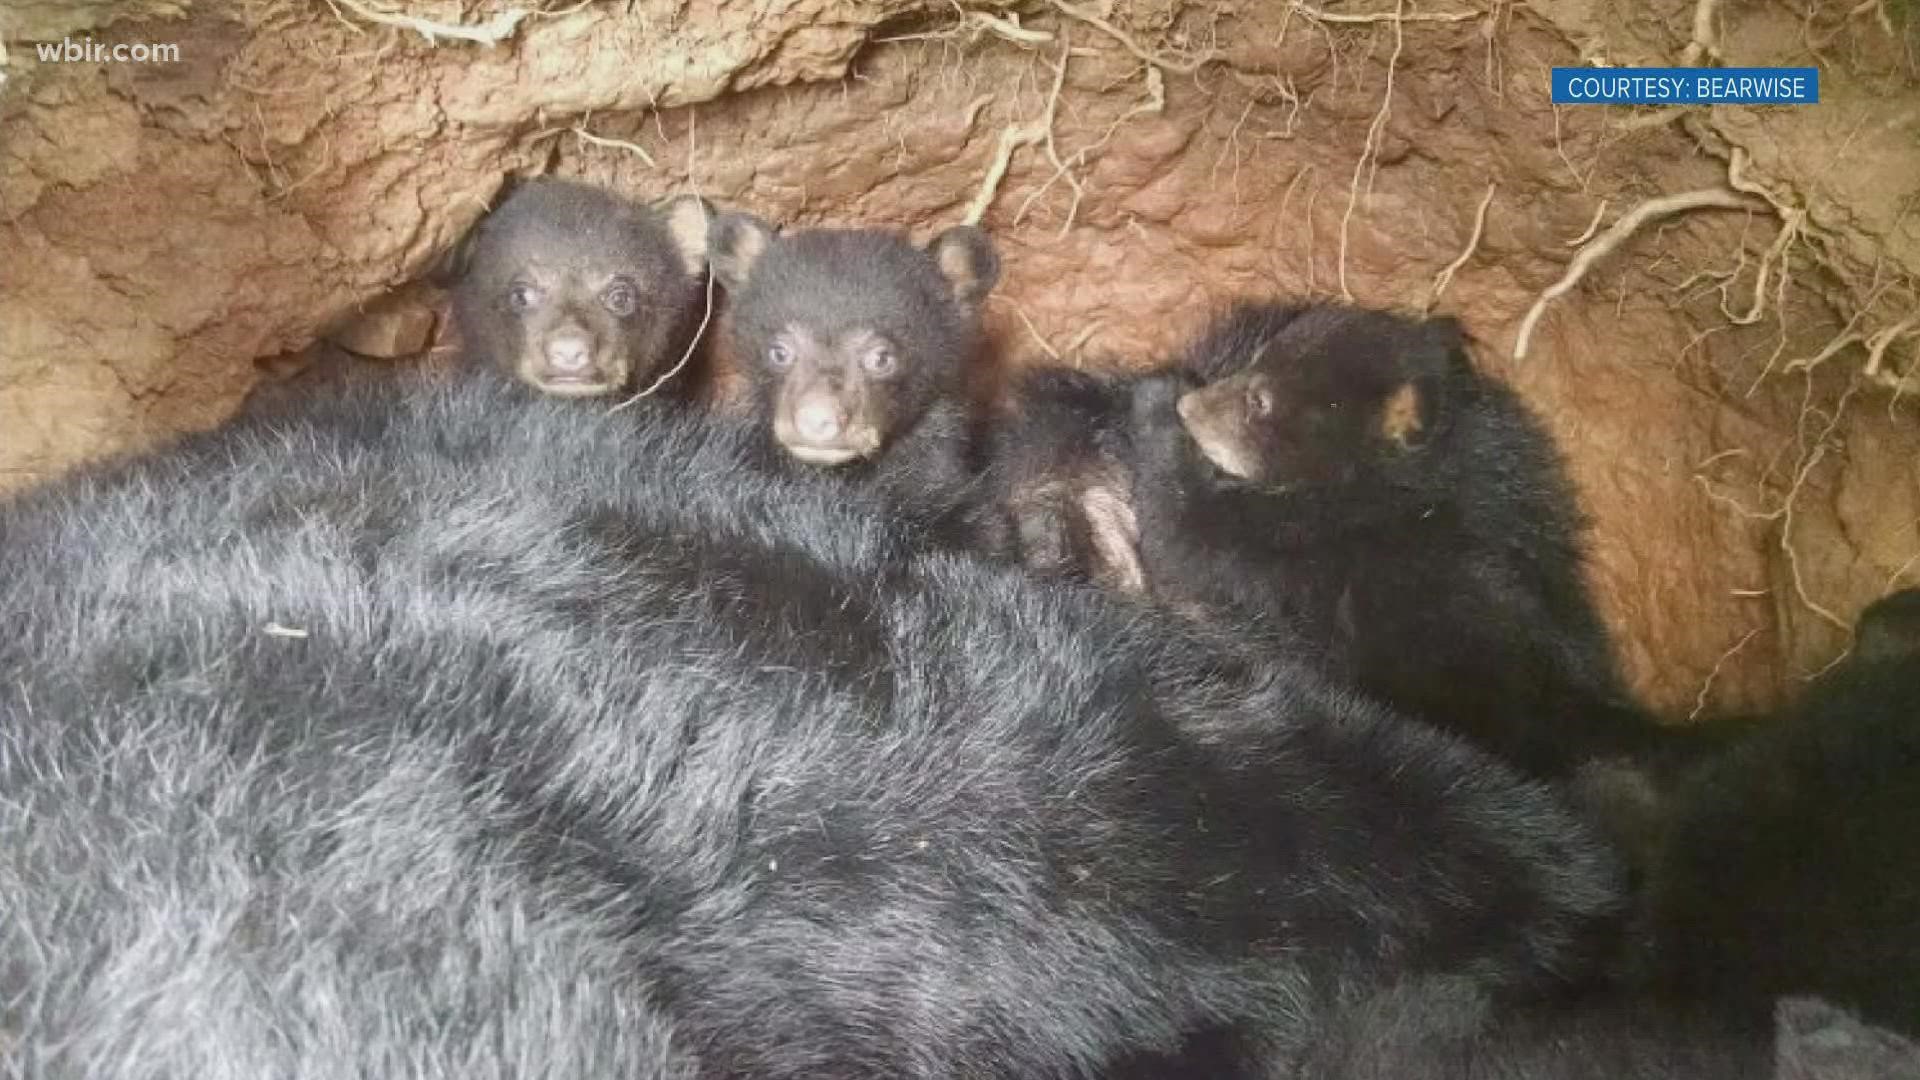 Bear cubs born last spring and who denned up with their mothers will finish their first year with their moms in March.